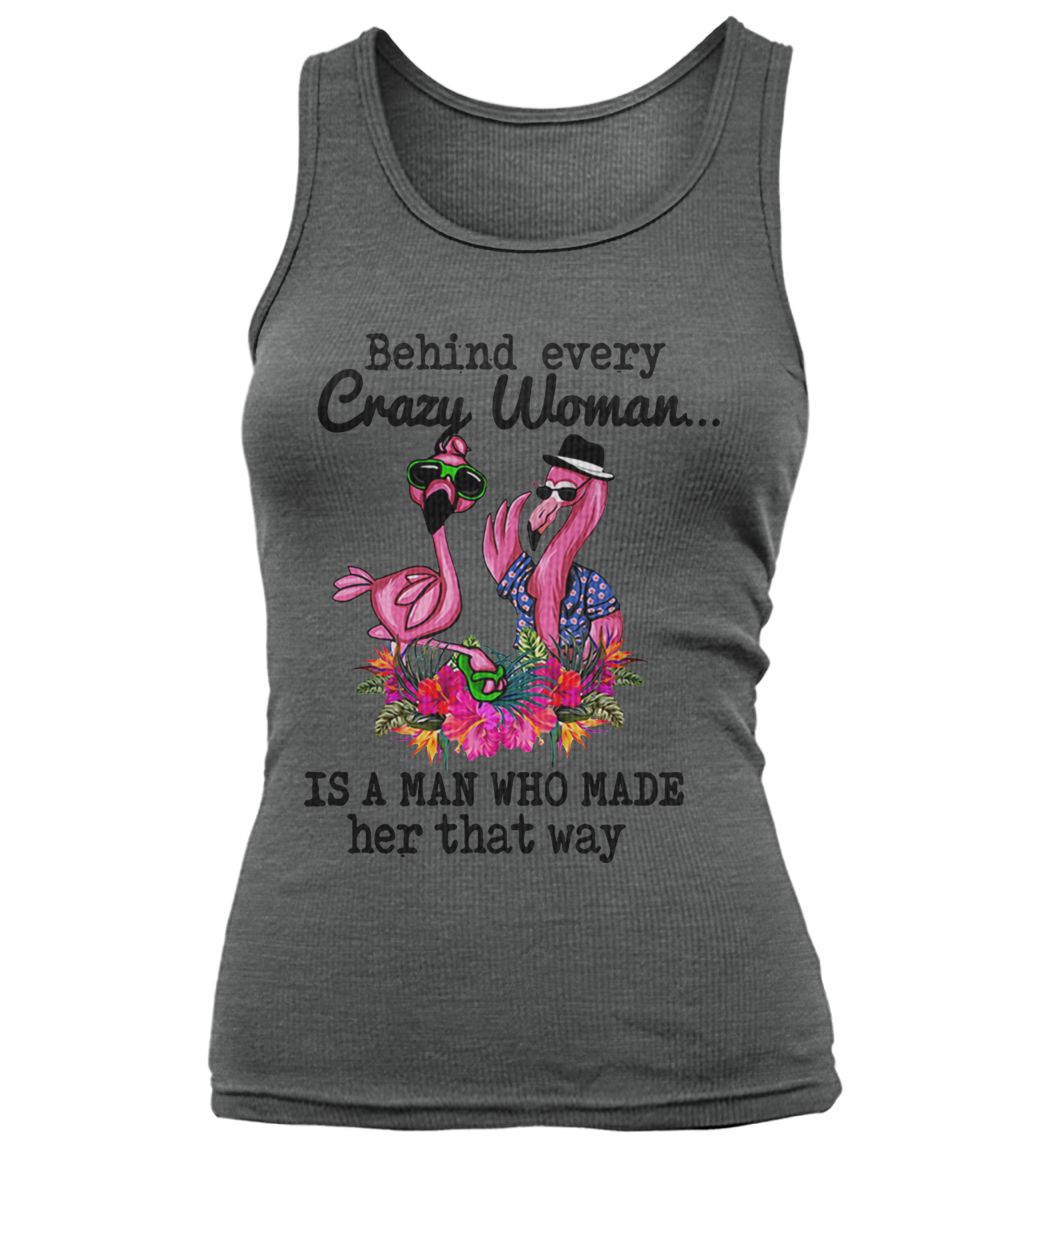 Flamingo behind every crazy woman is a man who made her that way women's tank top